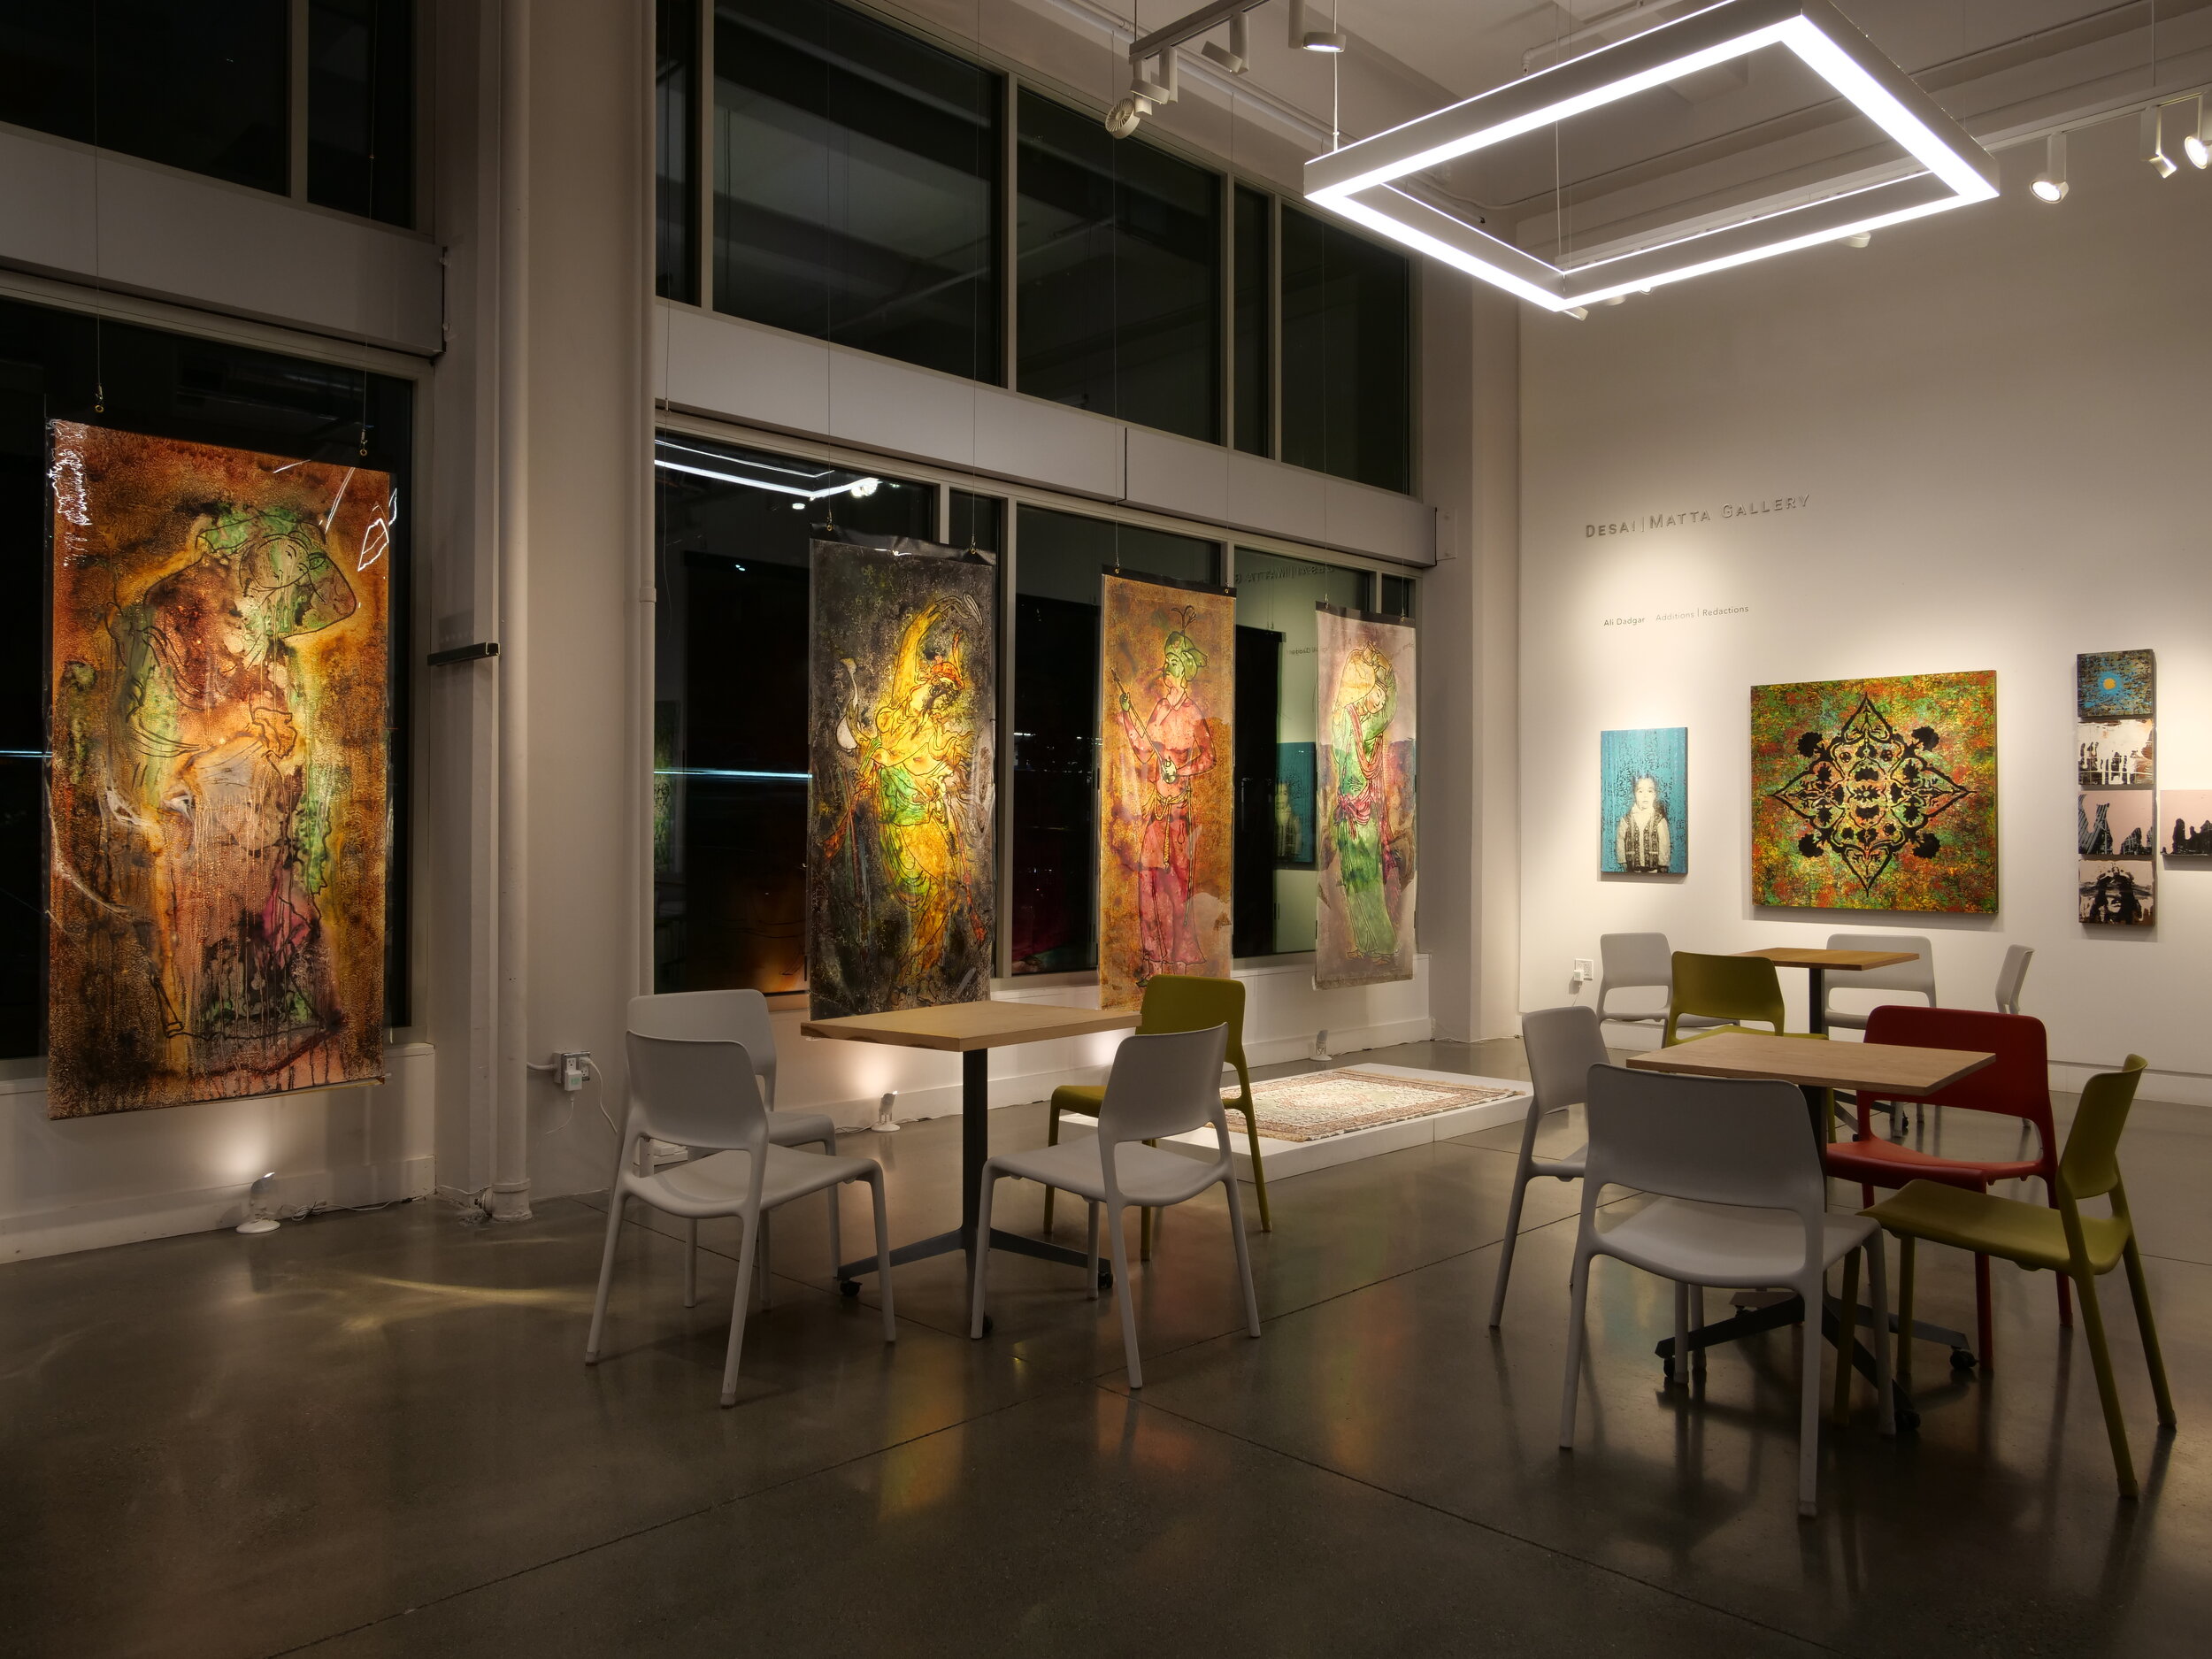 Gallery view of four large panels featuring figures in warm tones hung along the windows.  (Copy)